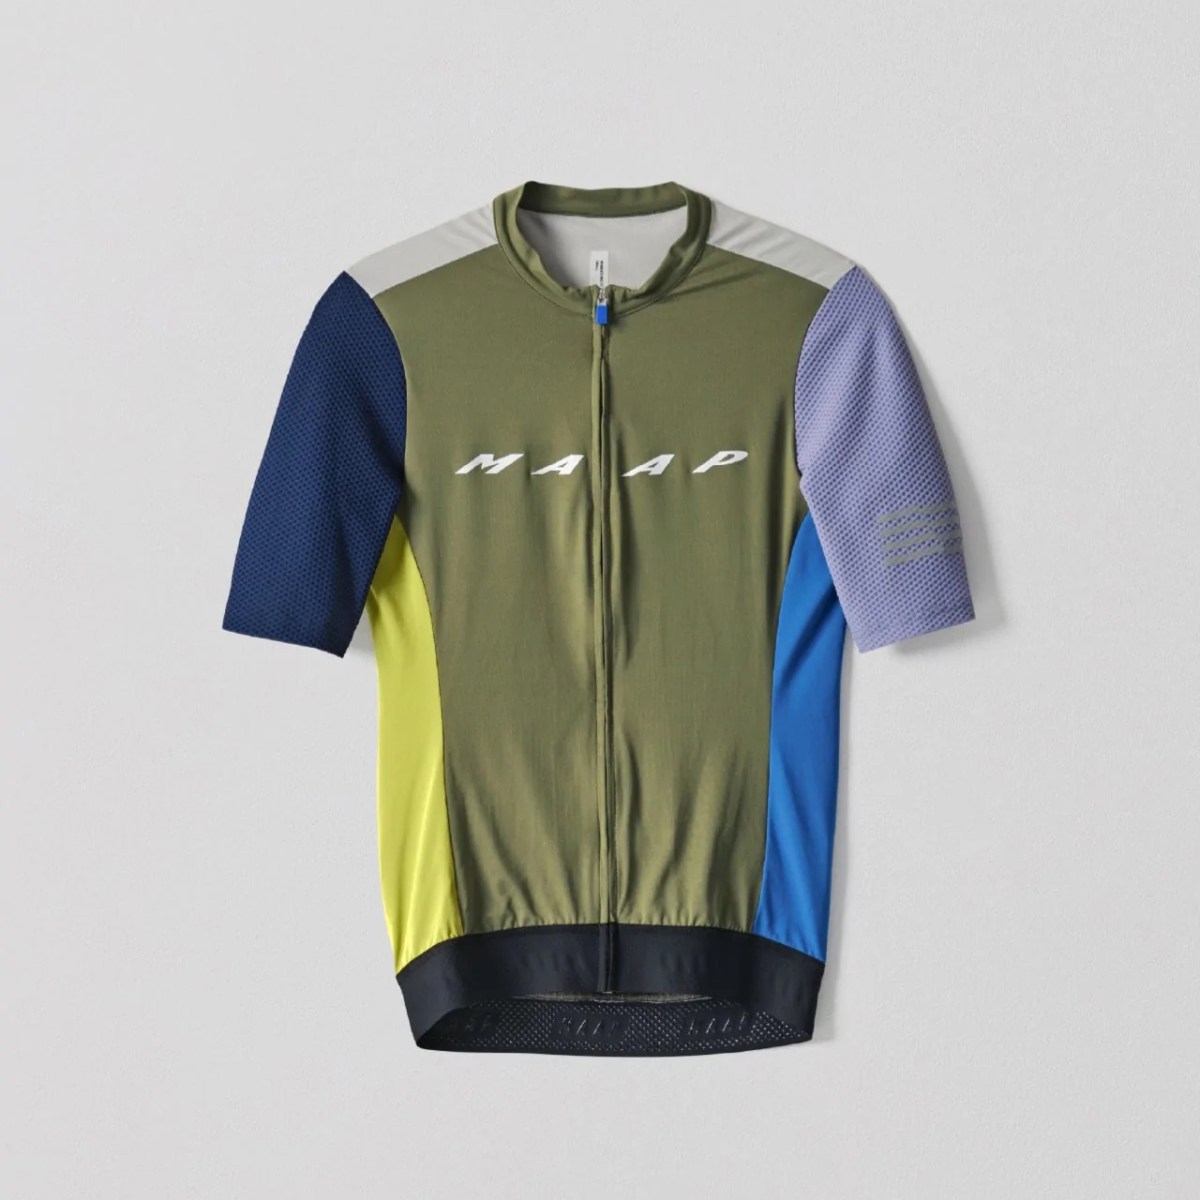 Evade OffCuts Pro Jersey – COOL HUNTING®